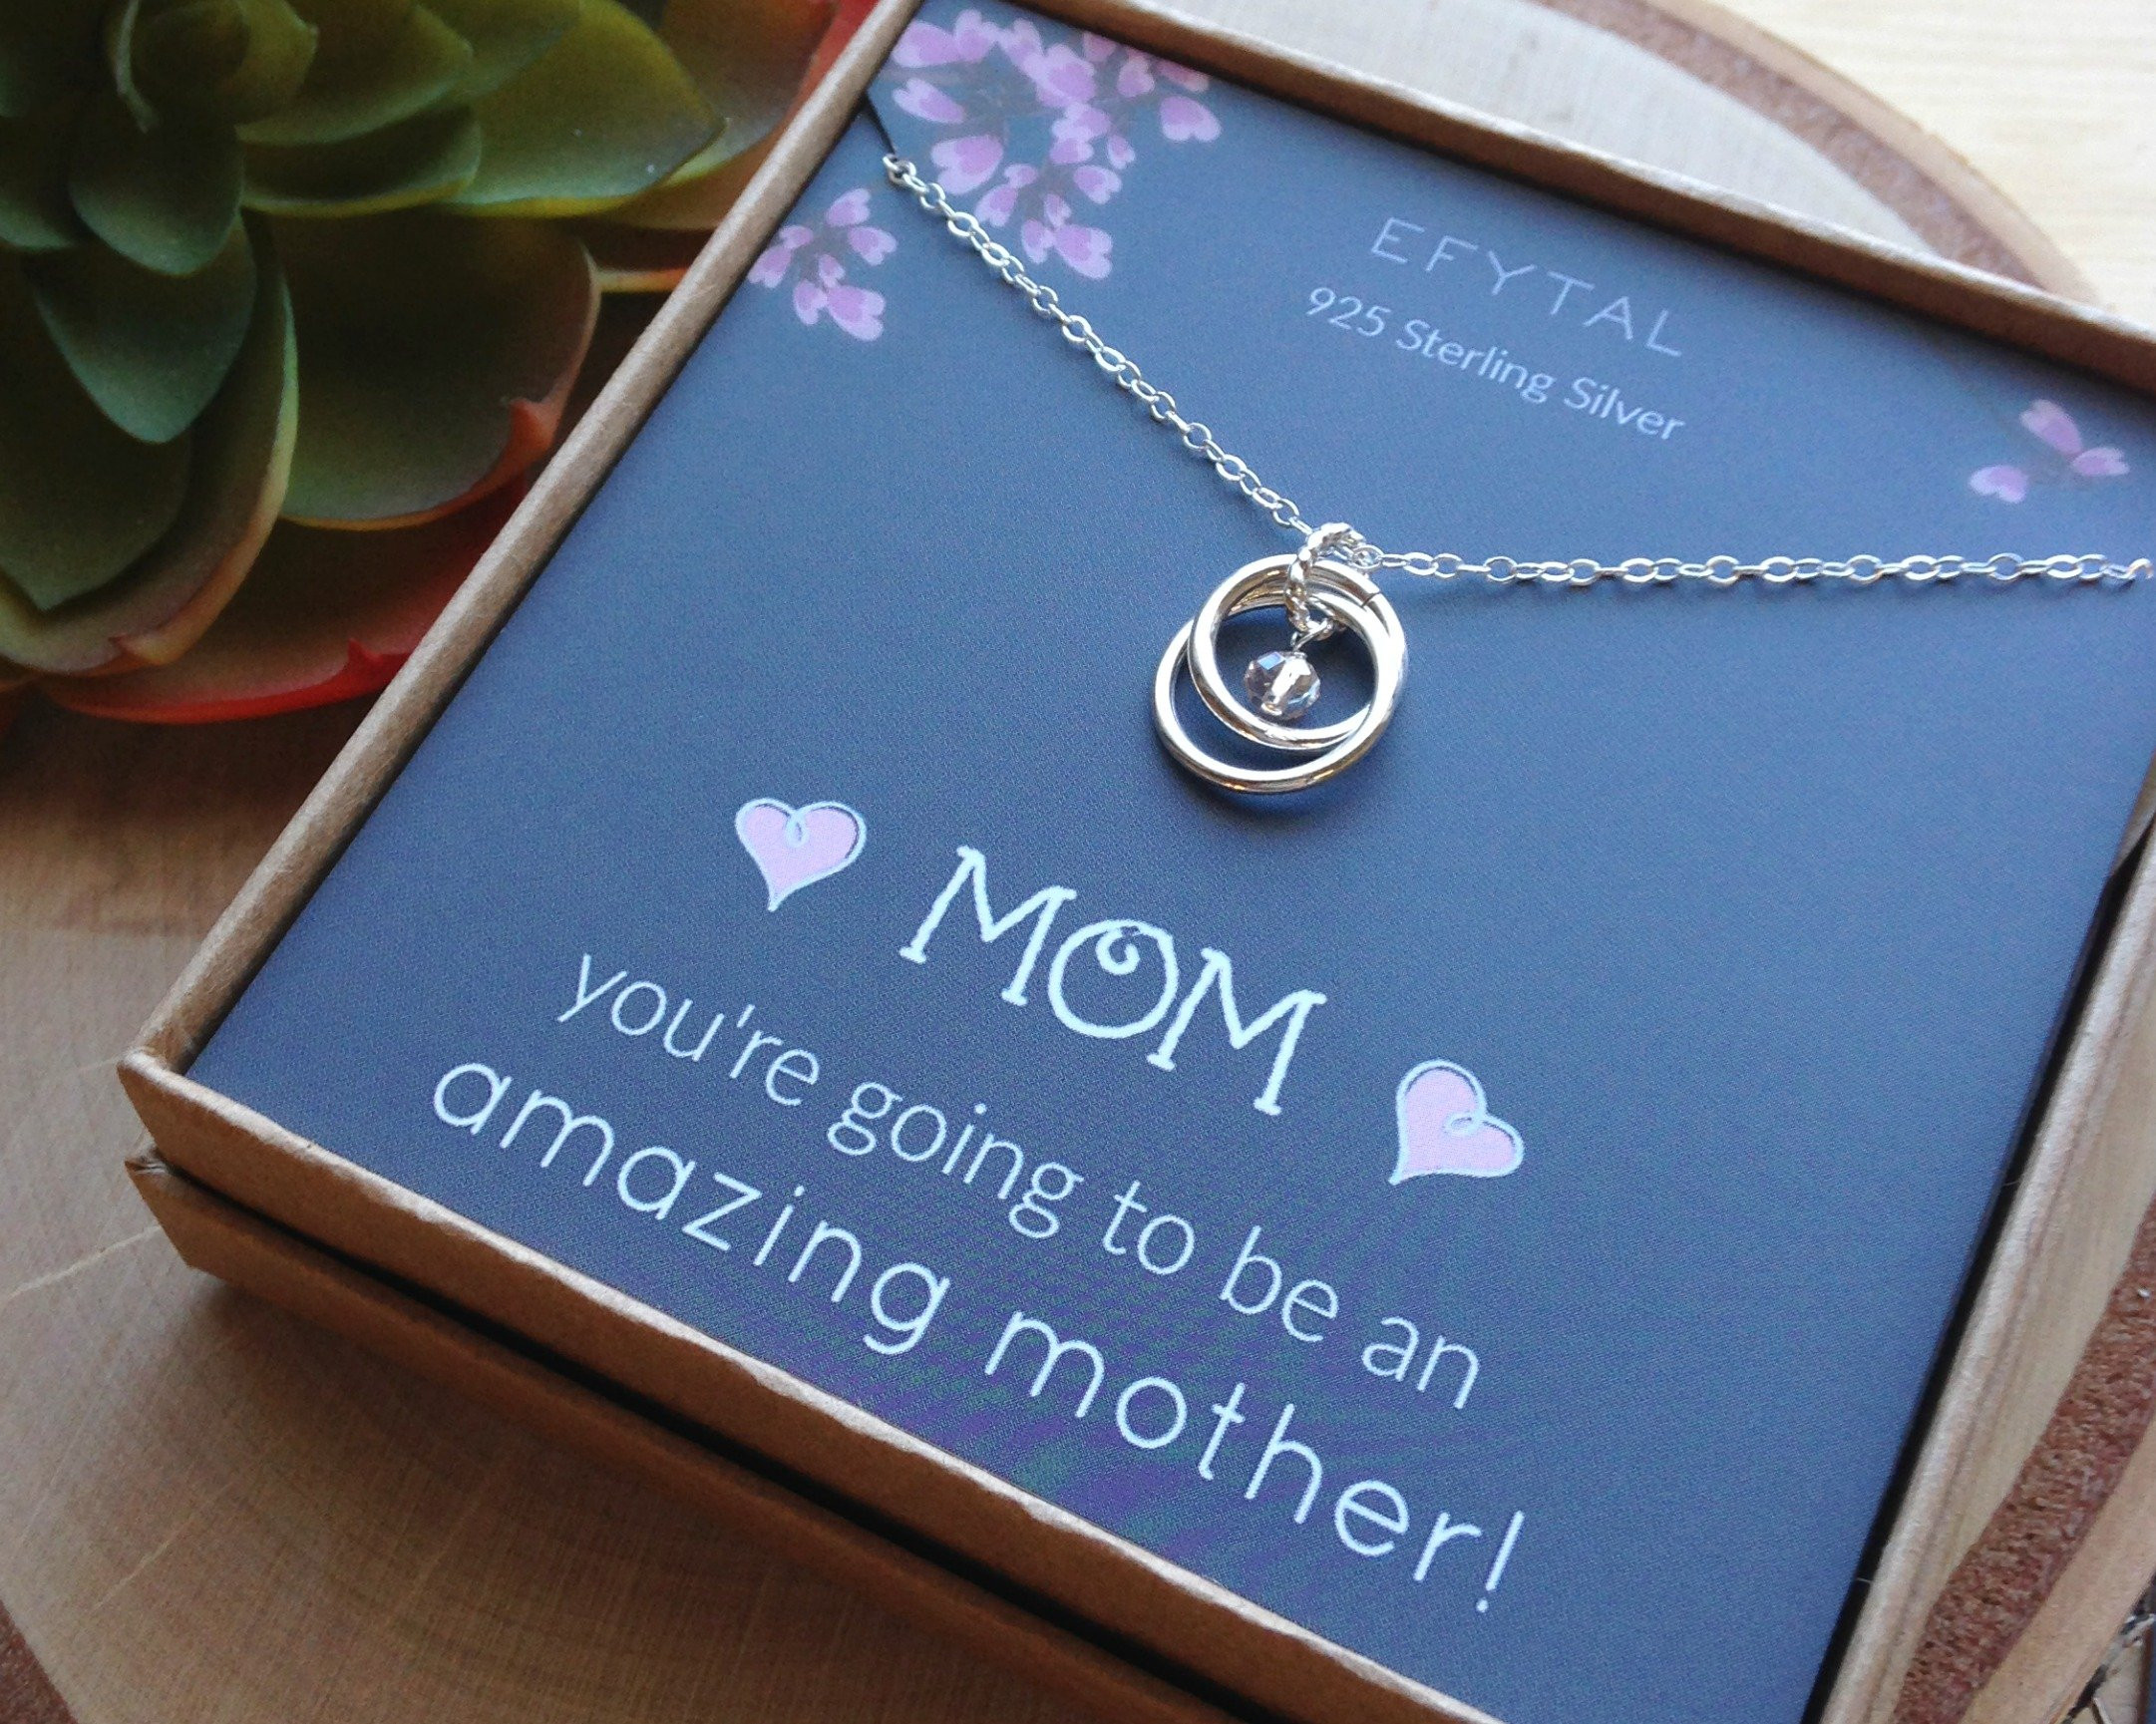 Baby Shower Gifts For The Mom
 Baby Shower Gift Sterling Silver Pregnancy Necklace for